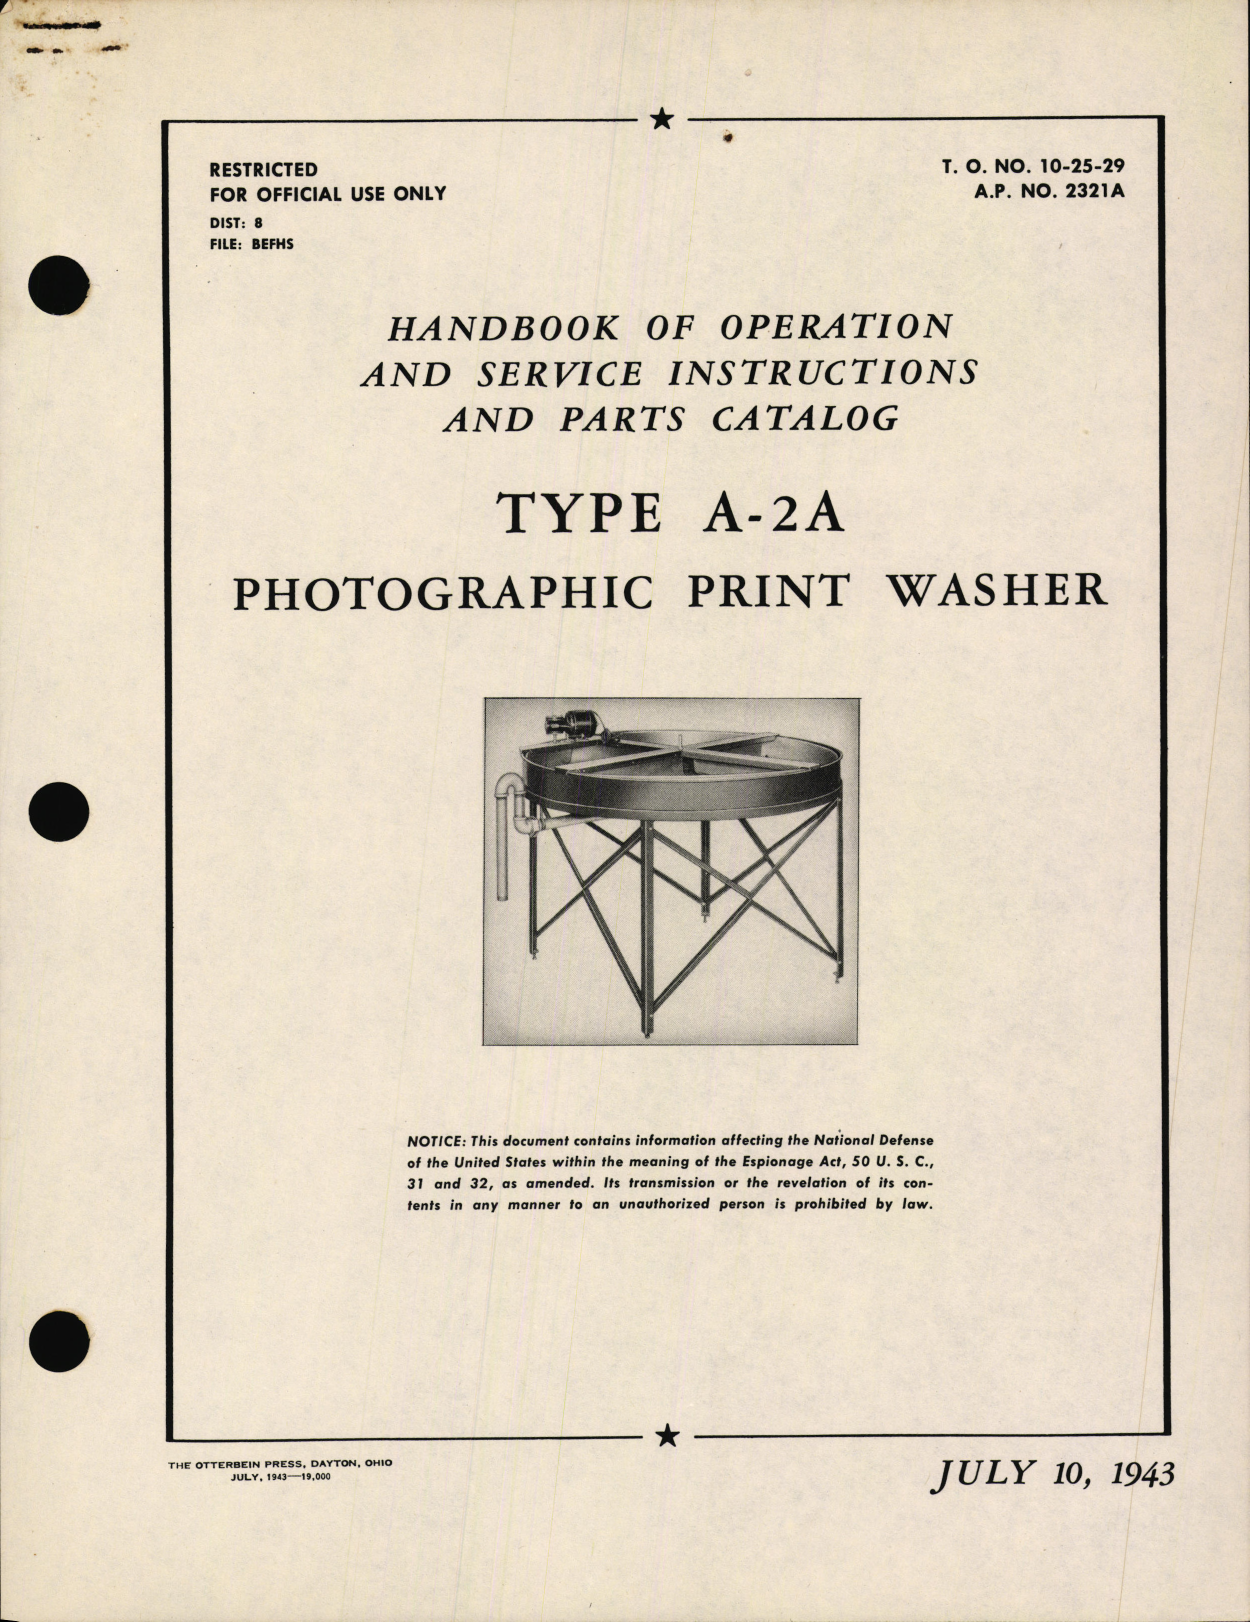 Sample page 1 from AirCorps Library document: Handbook of Operation and Service Instructions with Parts Catalog for Type A-2A Photographic Print Washer